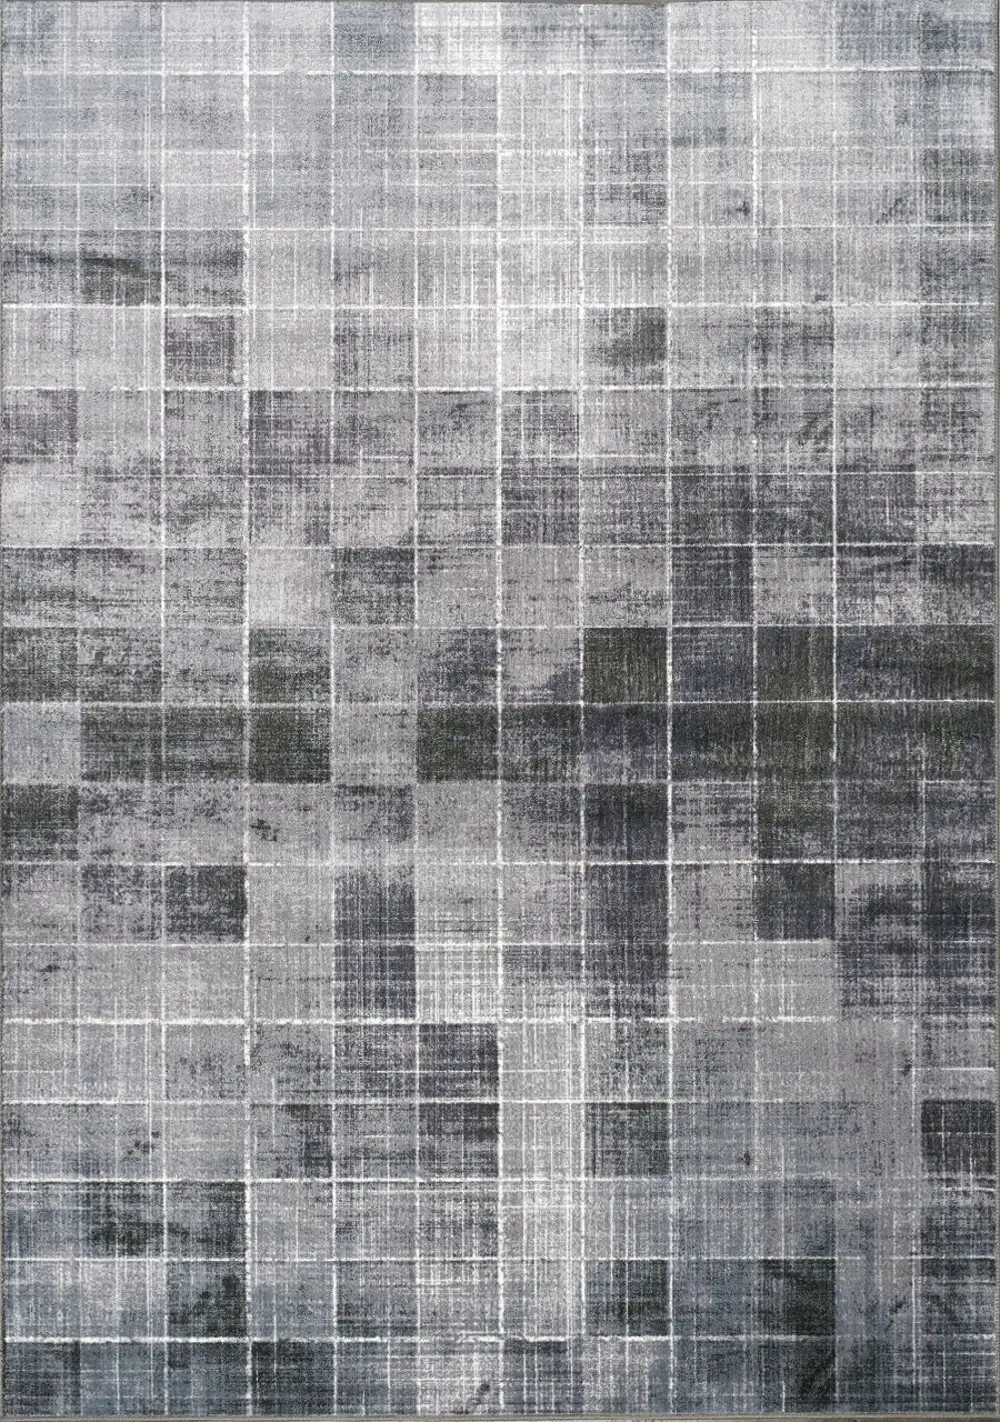 7 x 10 Large Distressed Squares Gray and Black Area Rug - Antika-1